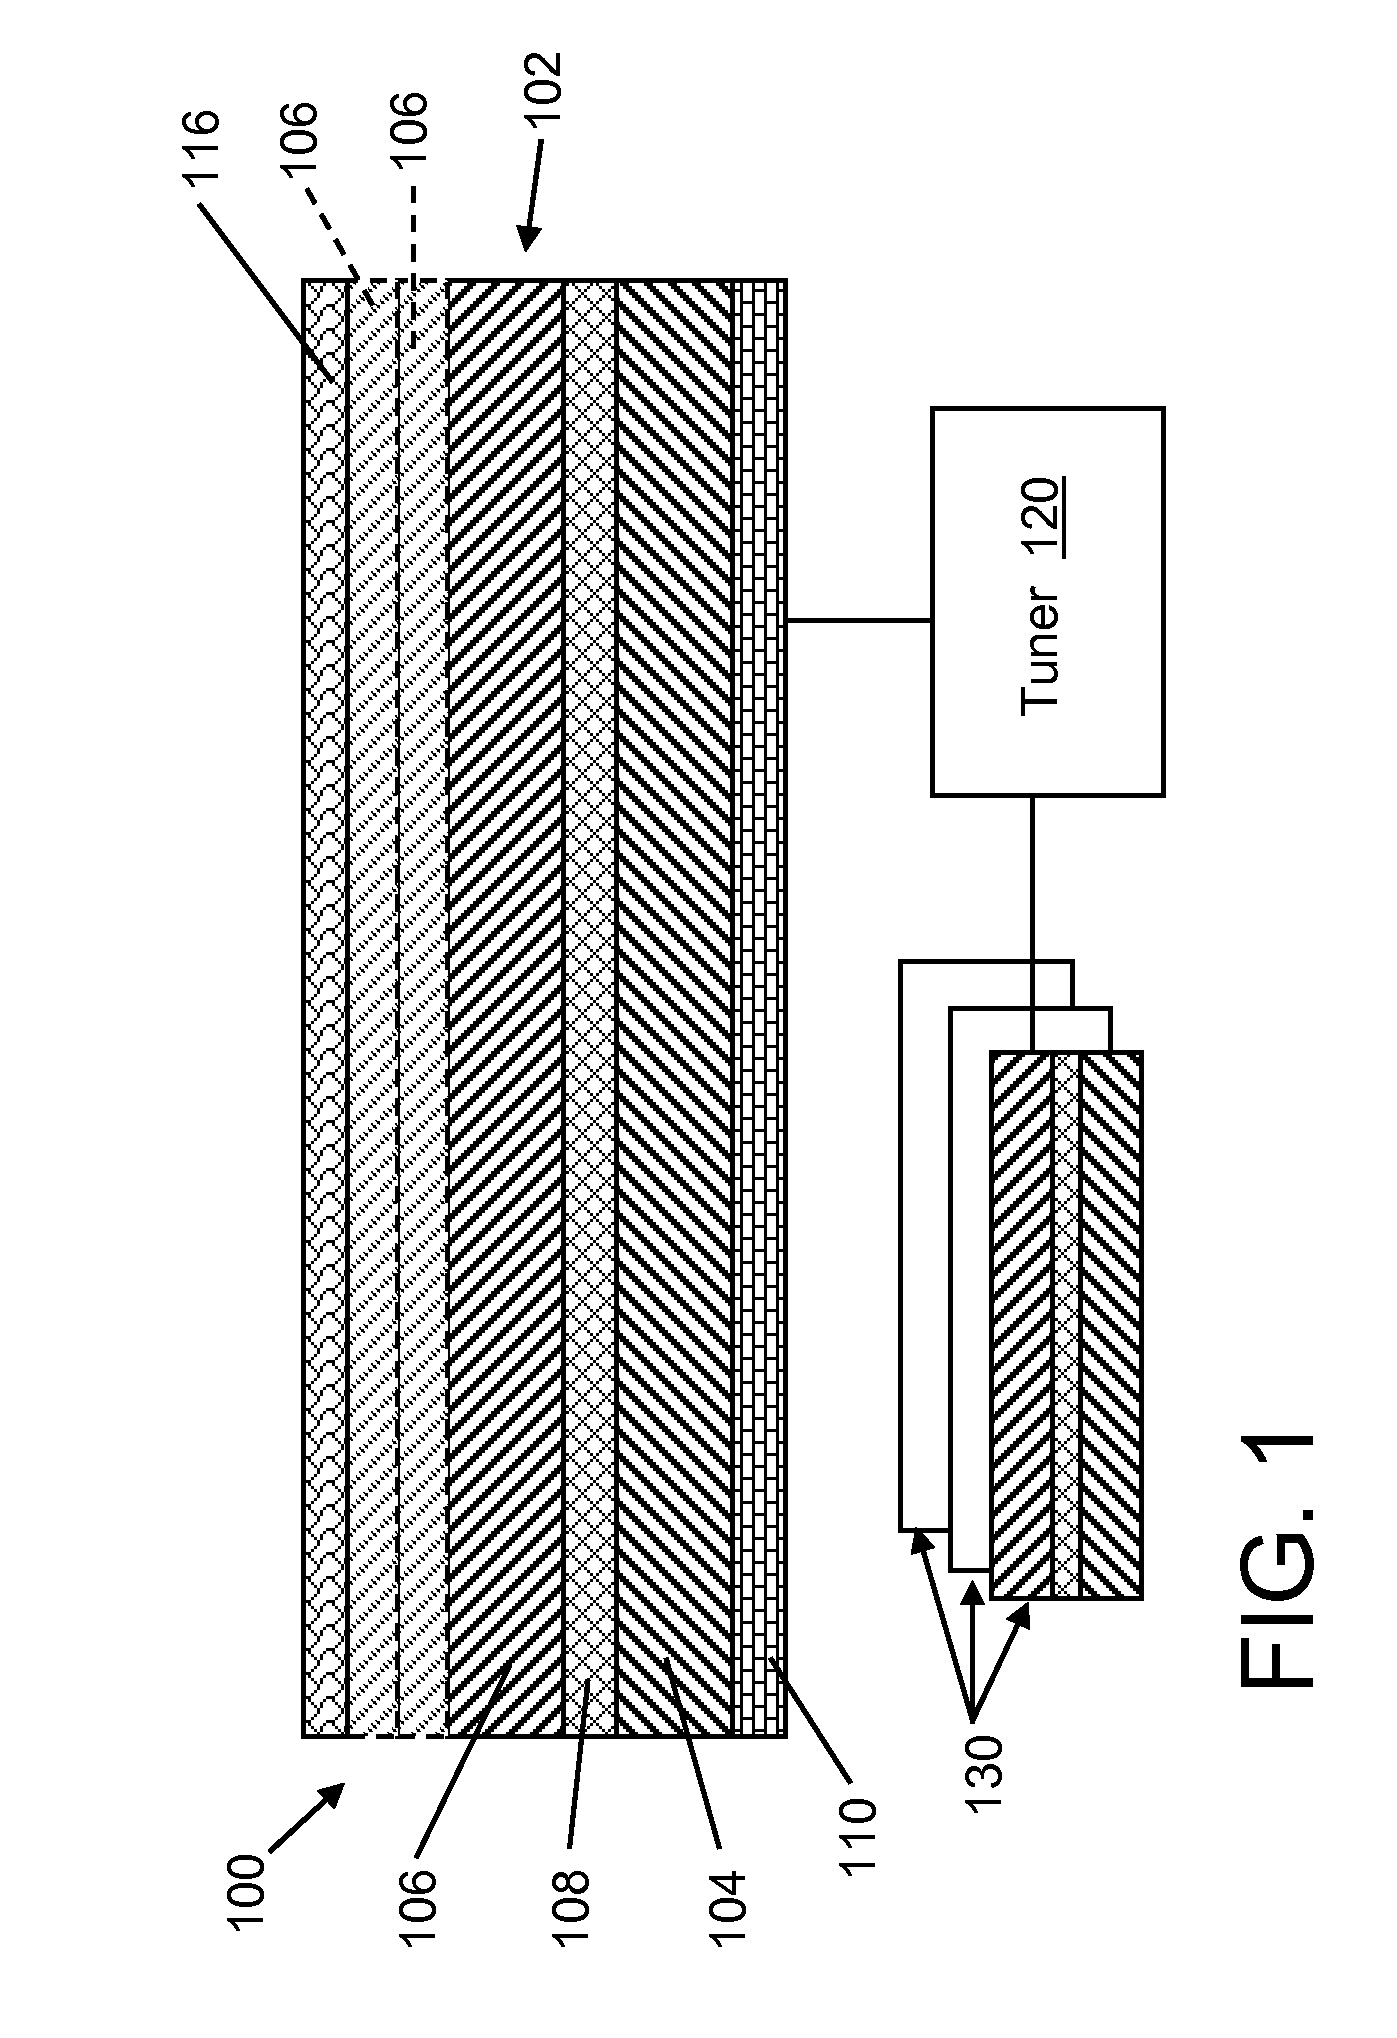 Design structure for electrically tunable resistor